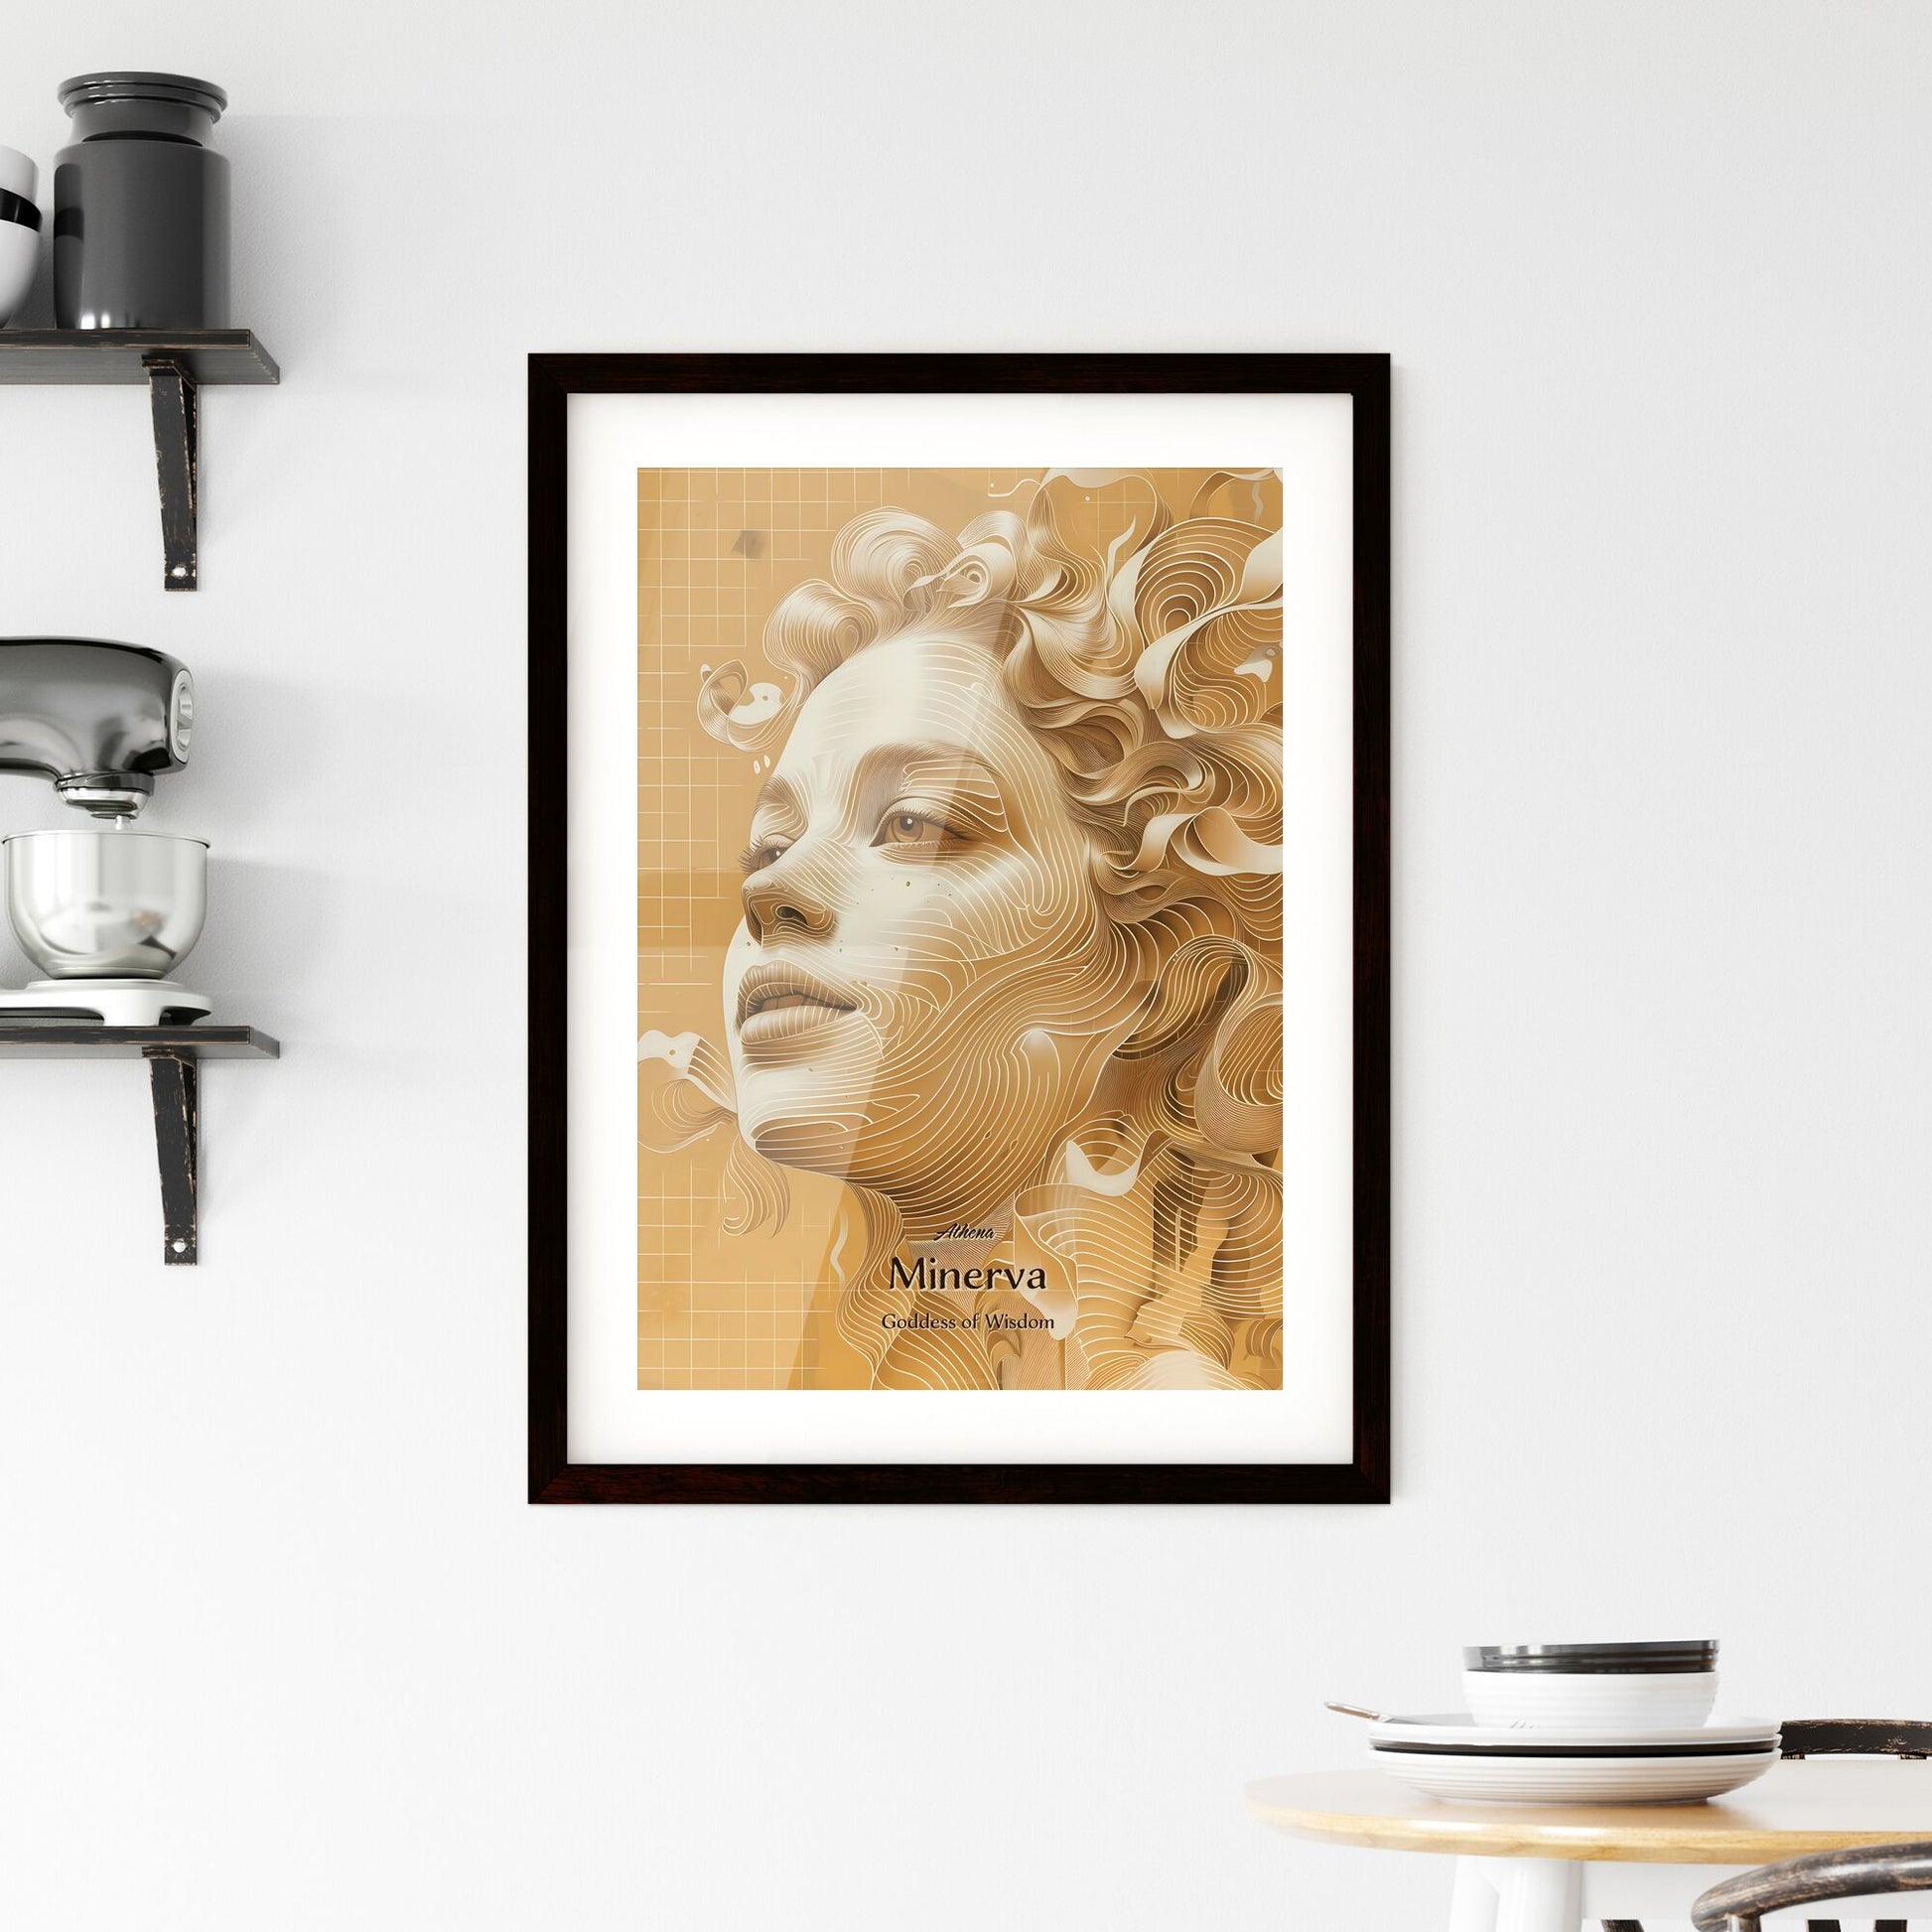 Athena, Minerva, Goddess of Wisdom, A Poster of a woman_s face with curly hair Default Title